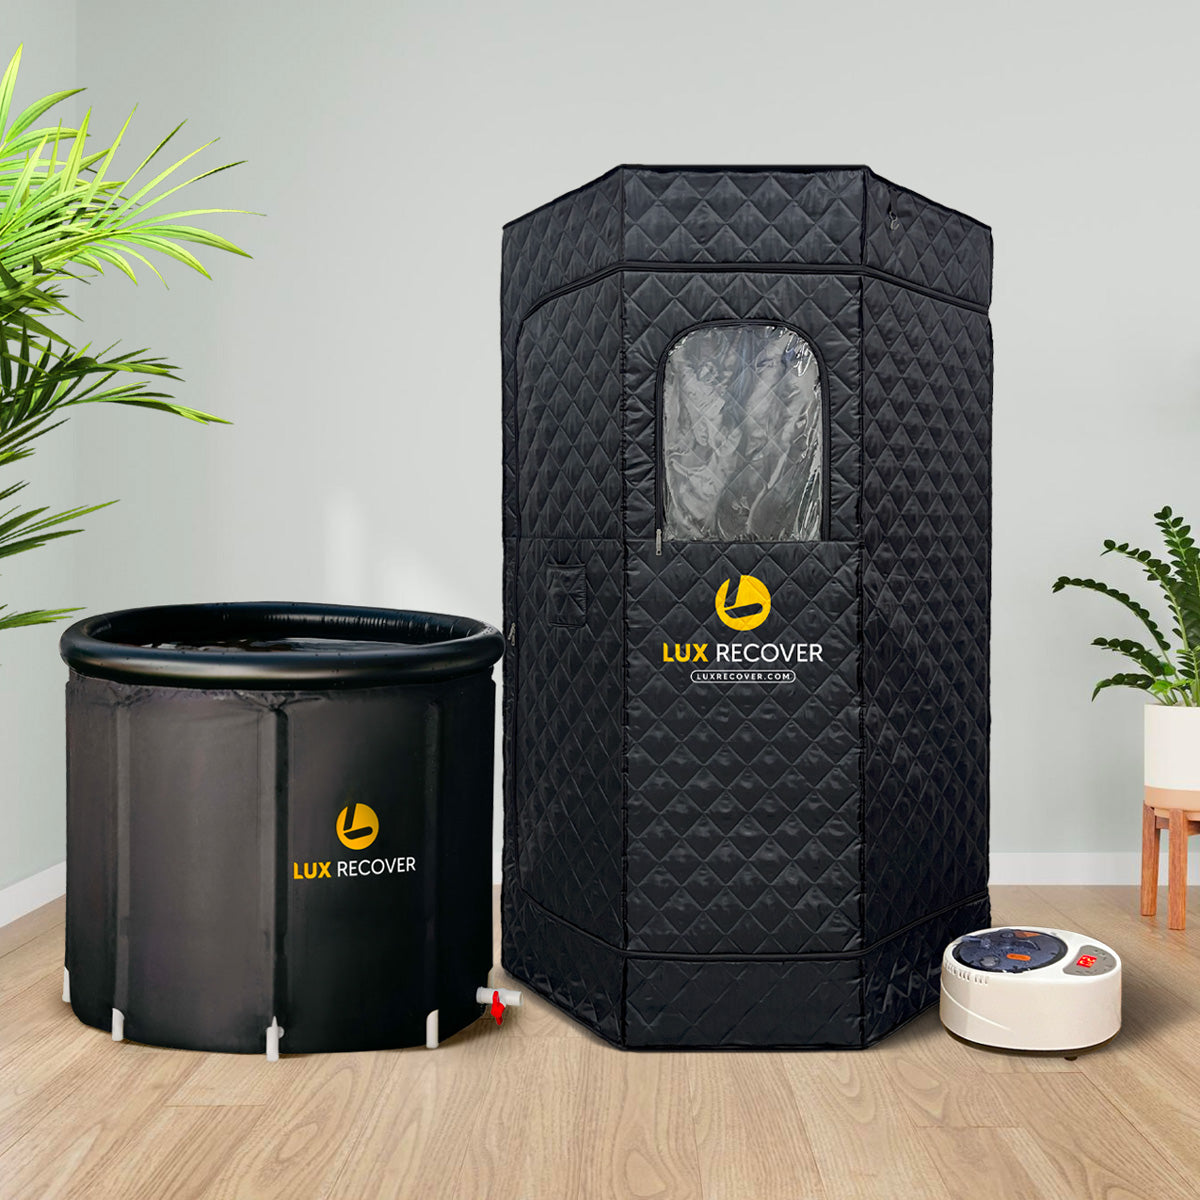 Lux Recover Portable Home Sauna - The Best Home Sauna in the UK